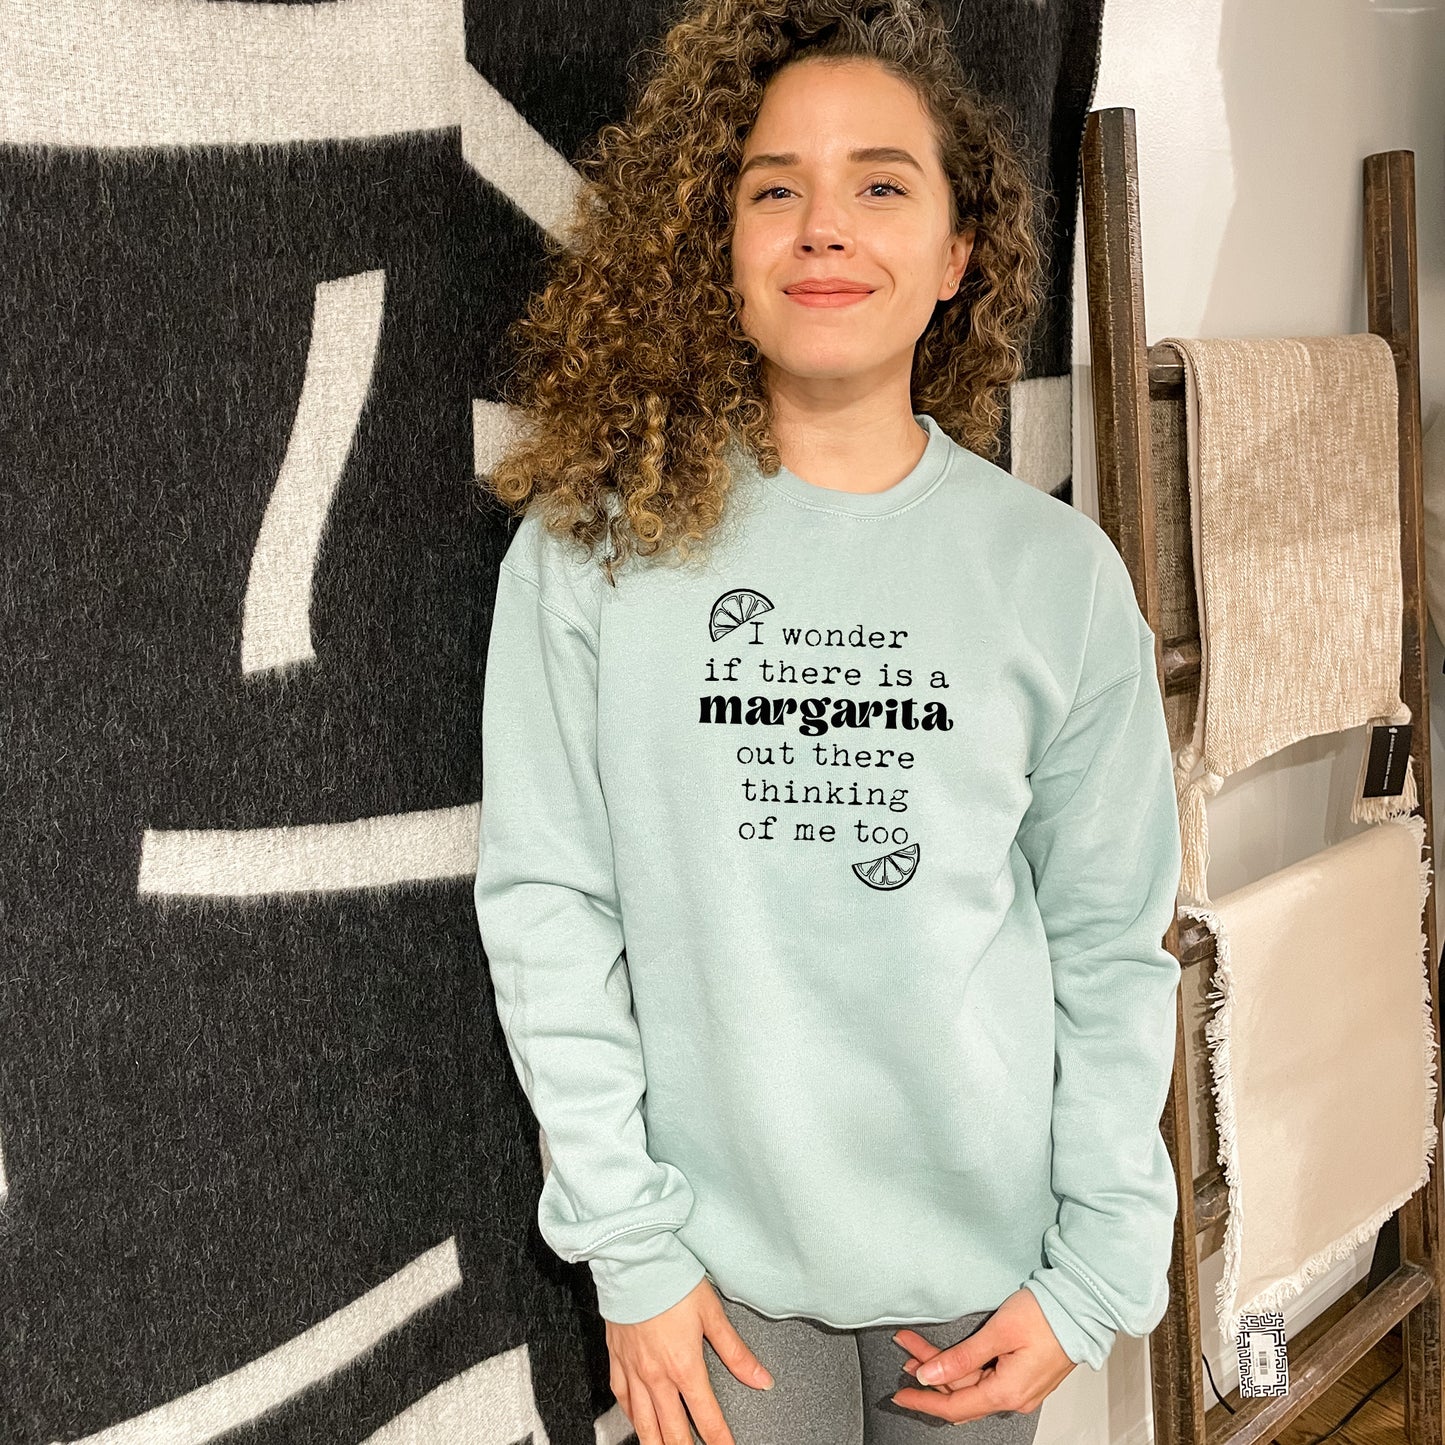 I Wonder If There Is A Margarita Out There Thinking Of Me Too - Unisex Sweatshirt - Heather Gray or Dusty Blue